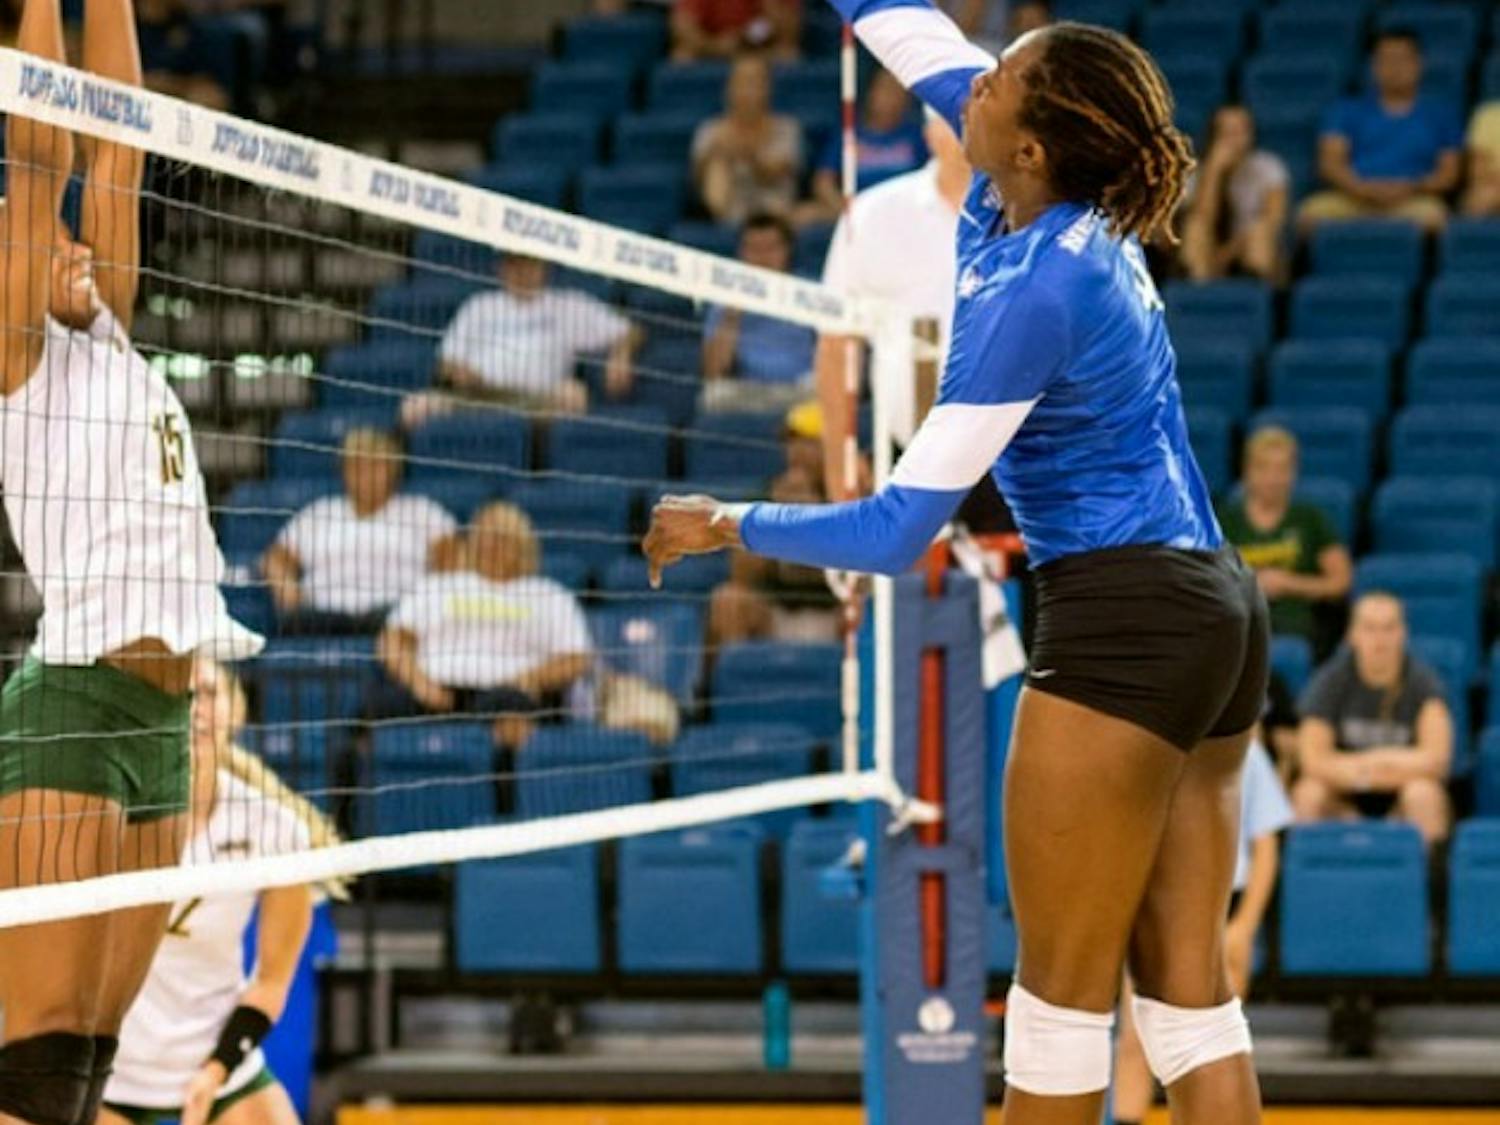 Junior middle blocker Amber Hatchett and the volleyball team won the USF Invite this weekend.
Wenyi Yang, The Spectrum